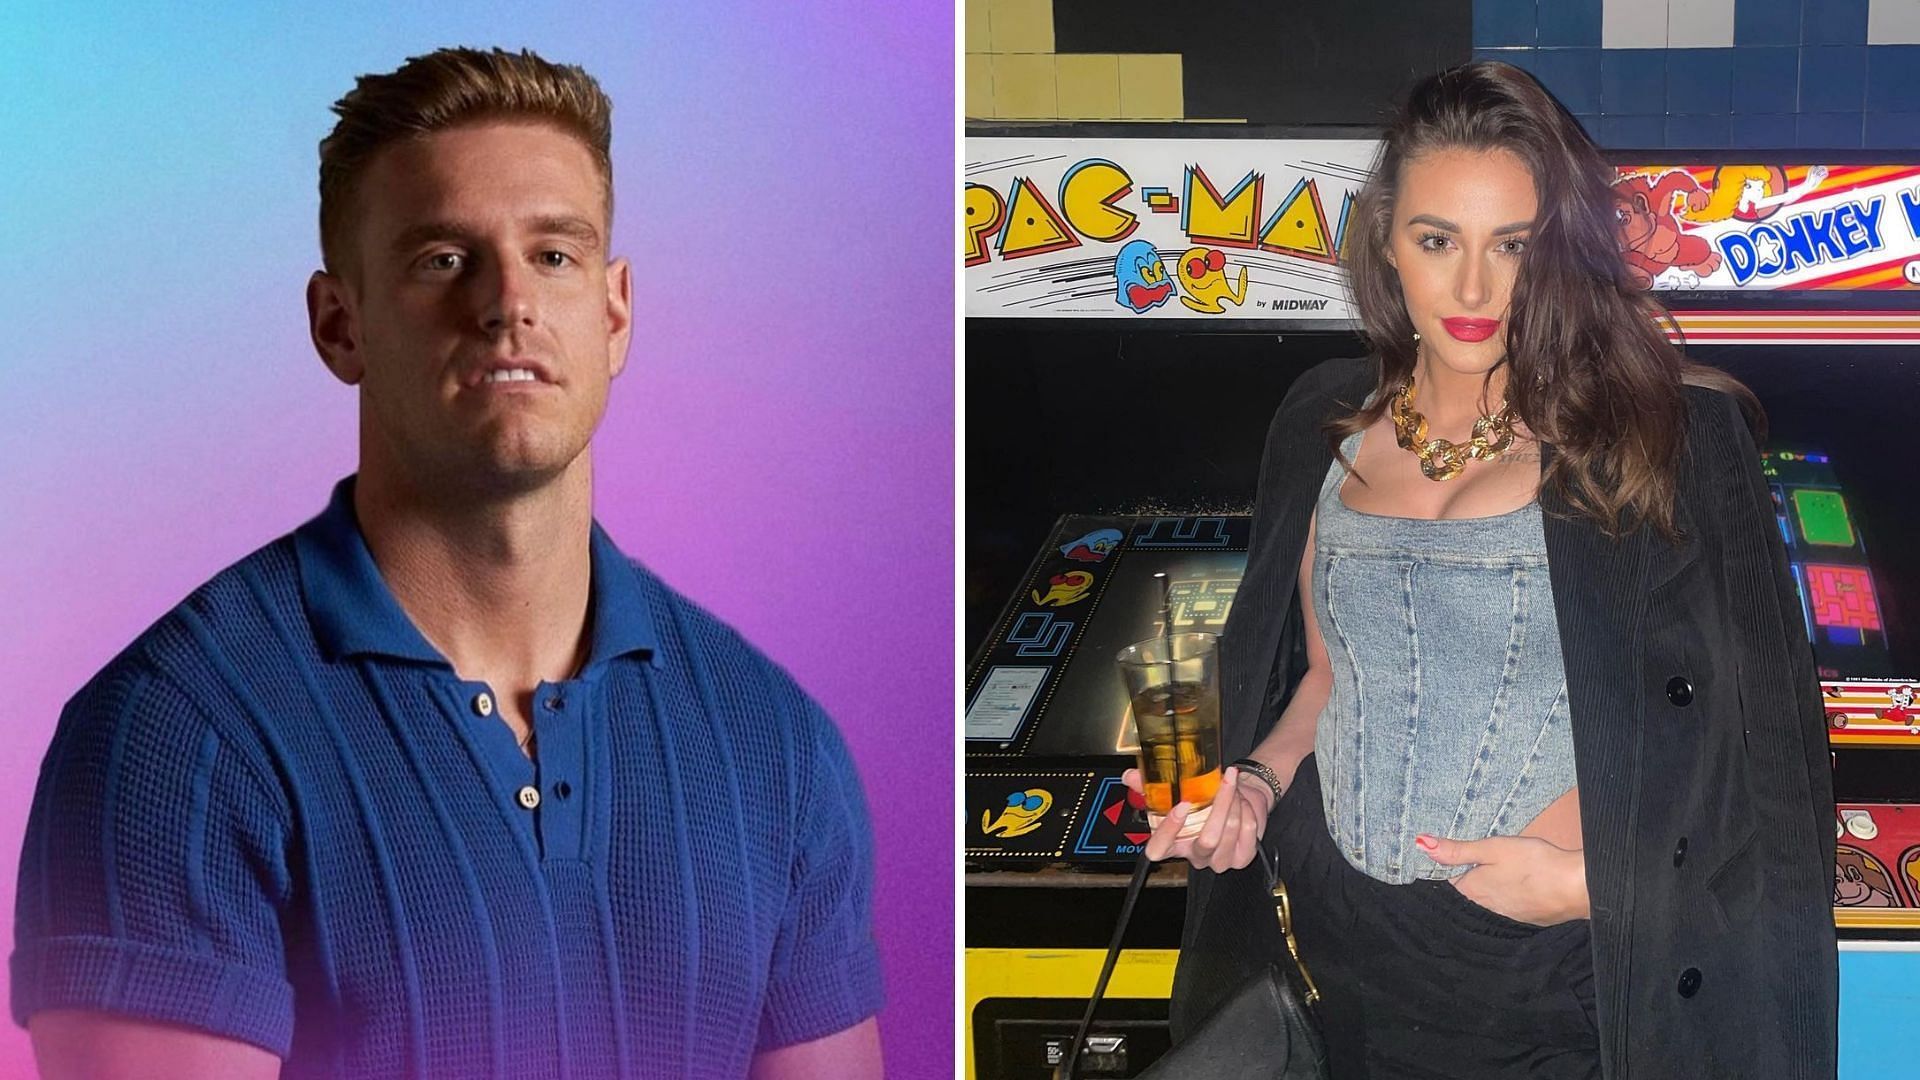 Perfect Match': How Old Is Chloe Compared to Shayne and Mitchell?